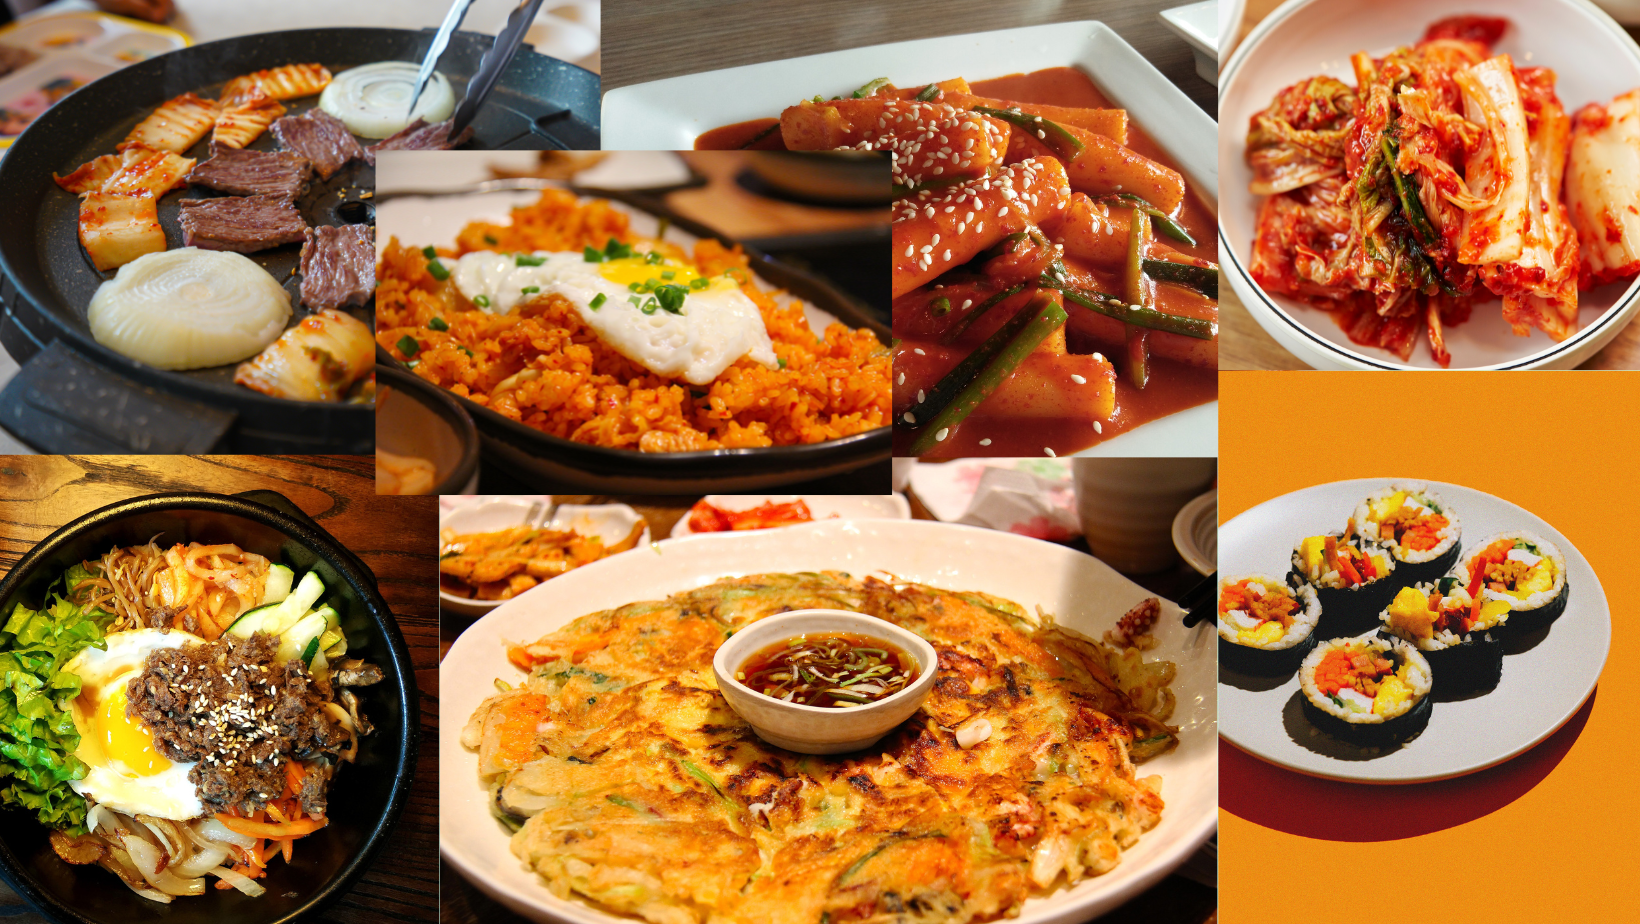 Pictures of different kinds of Korean dishes, some of which appear in the Pippa Park series.